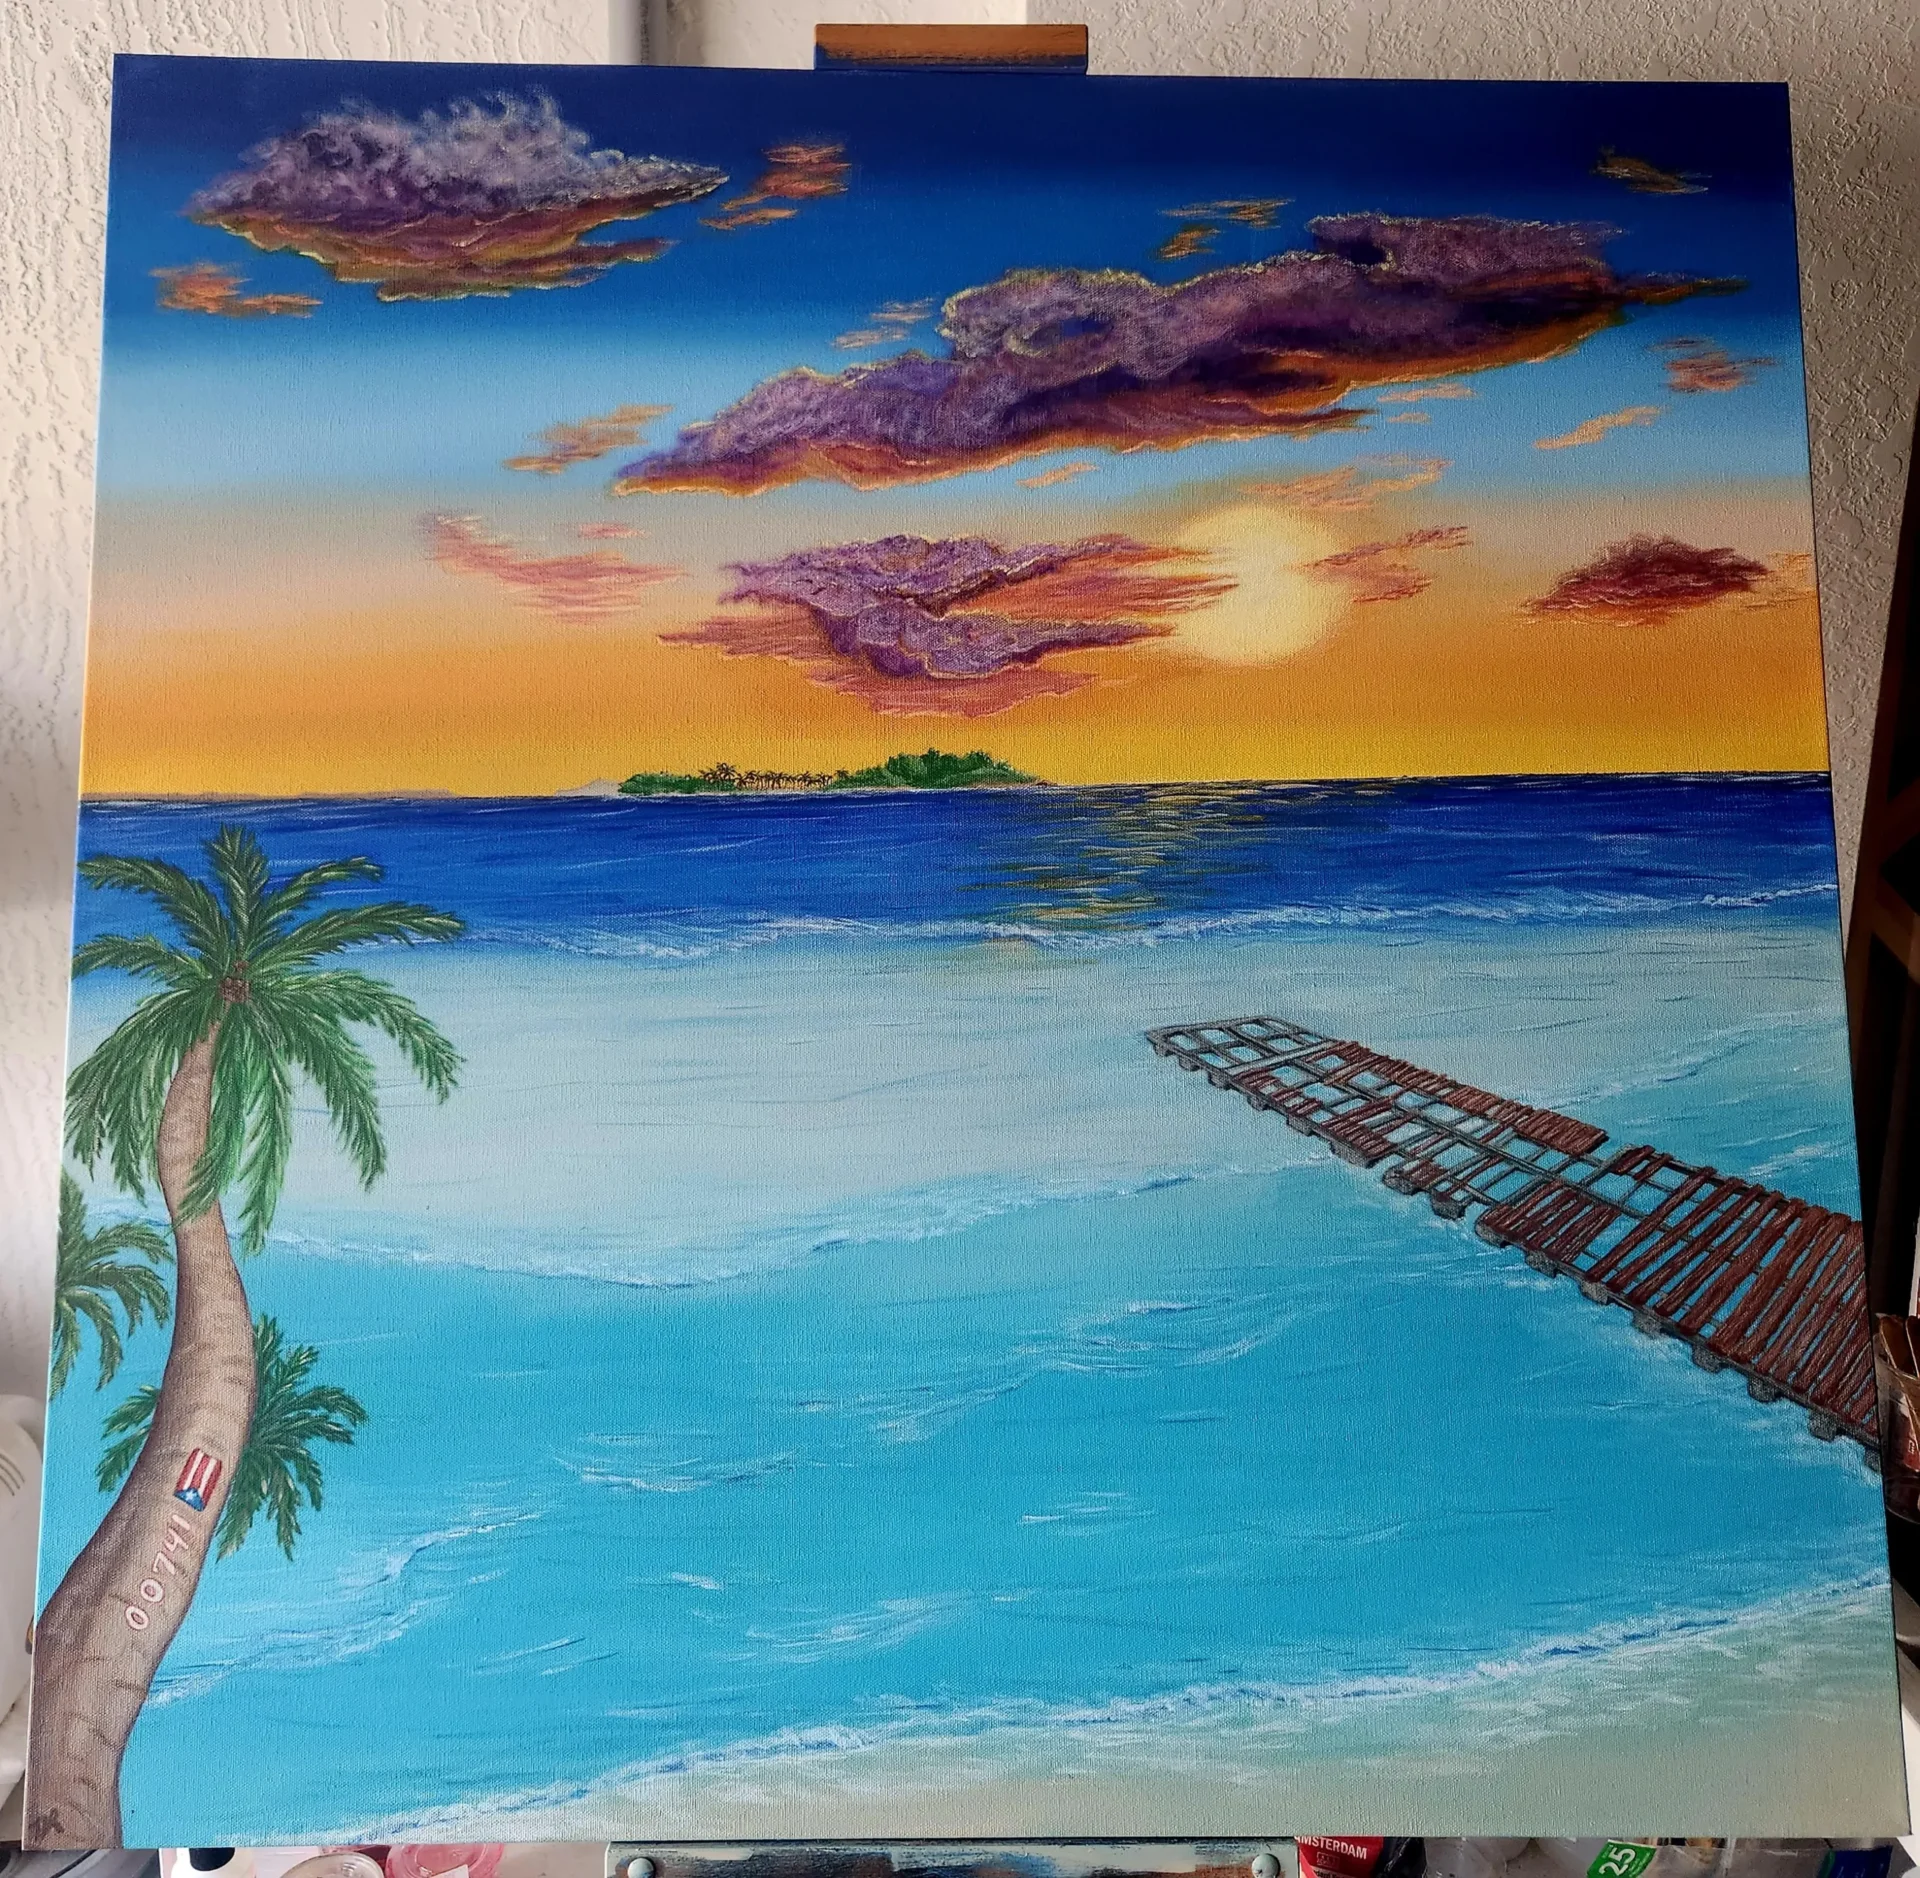 A painting of an ocean with palm trees and a pier.